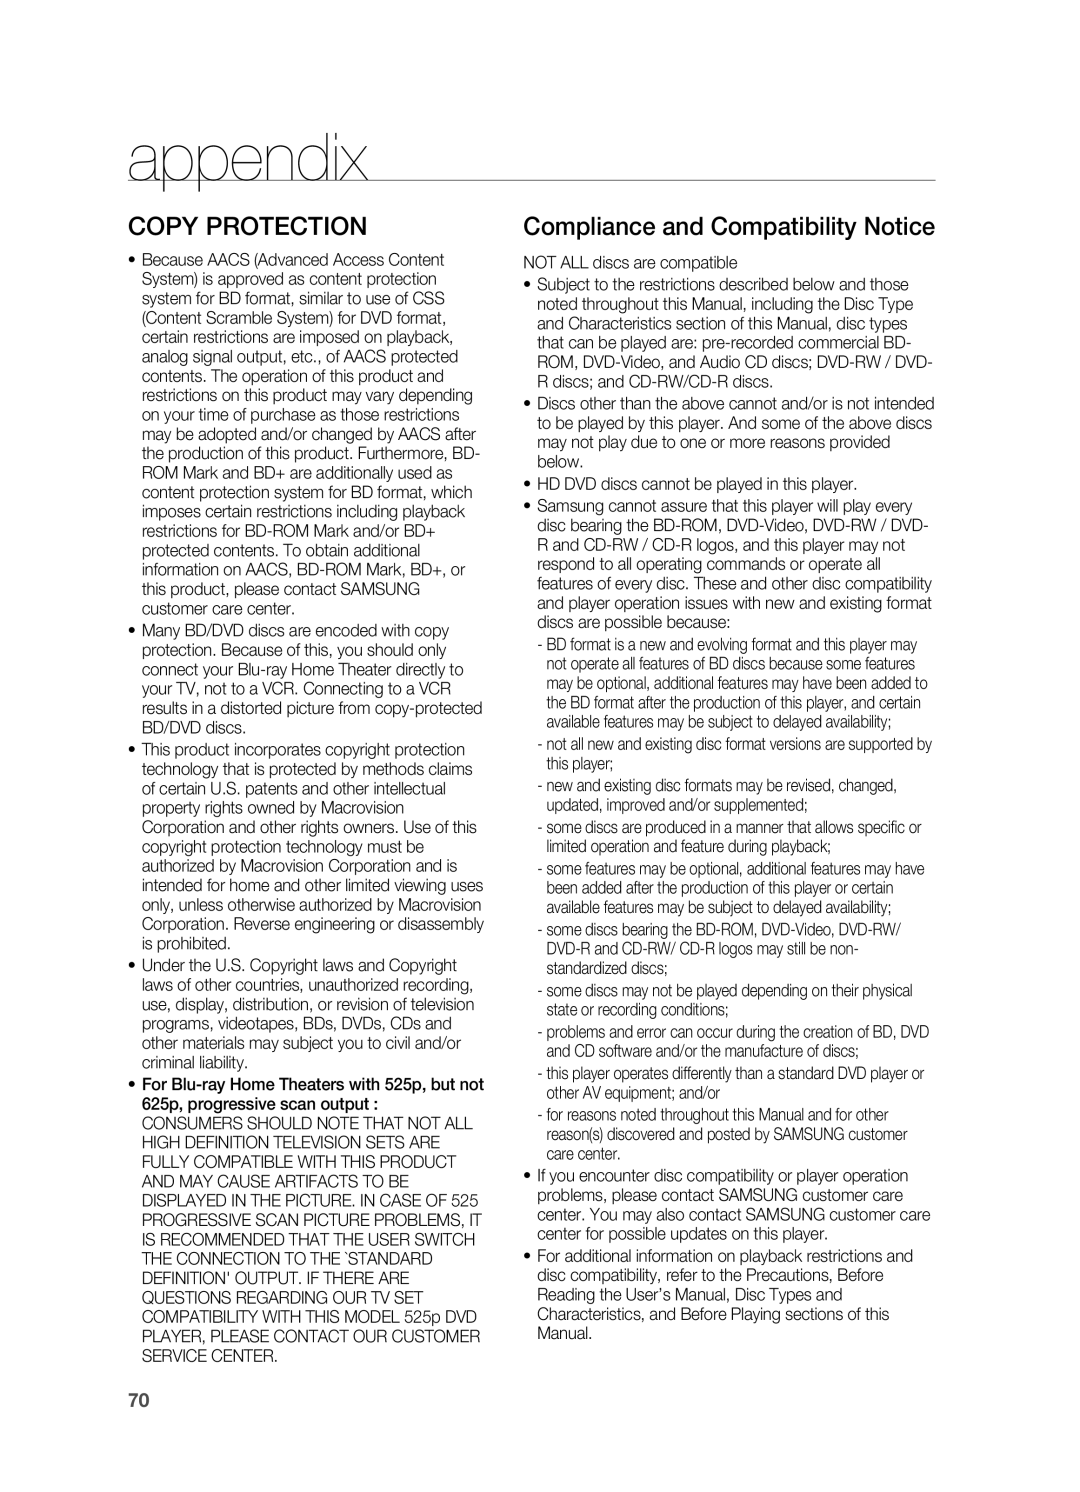 Samsung HT-BD2S manual Copy Protection, Compliance and Compatibility Notice, appendix 